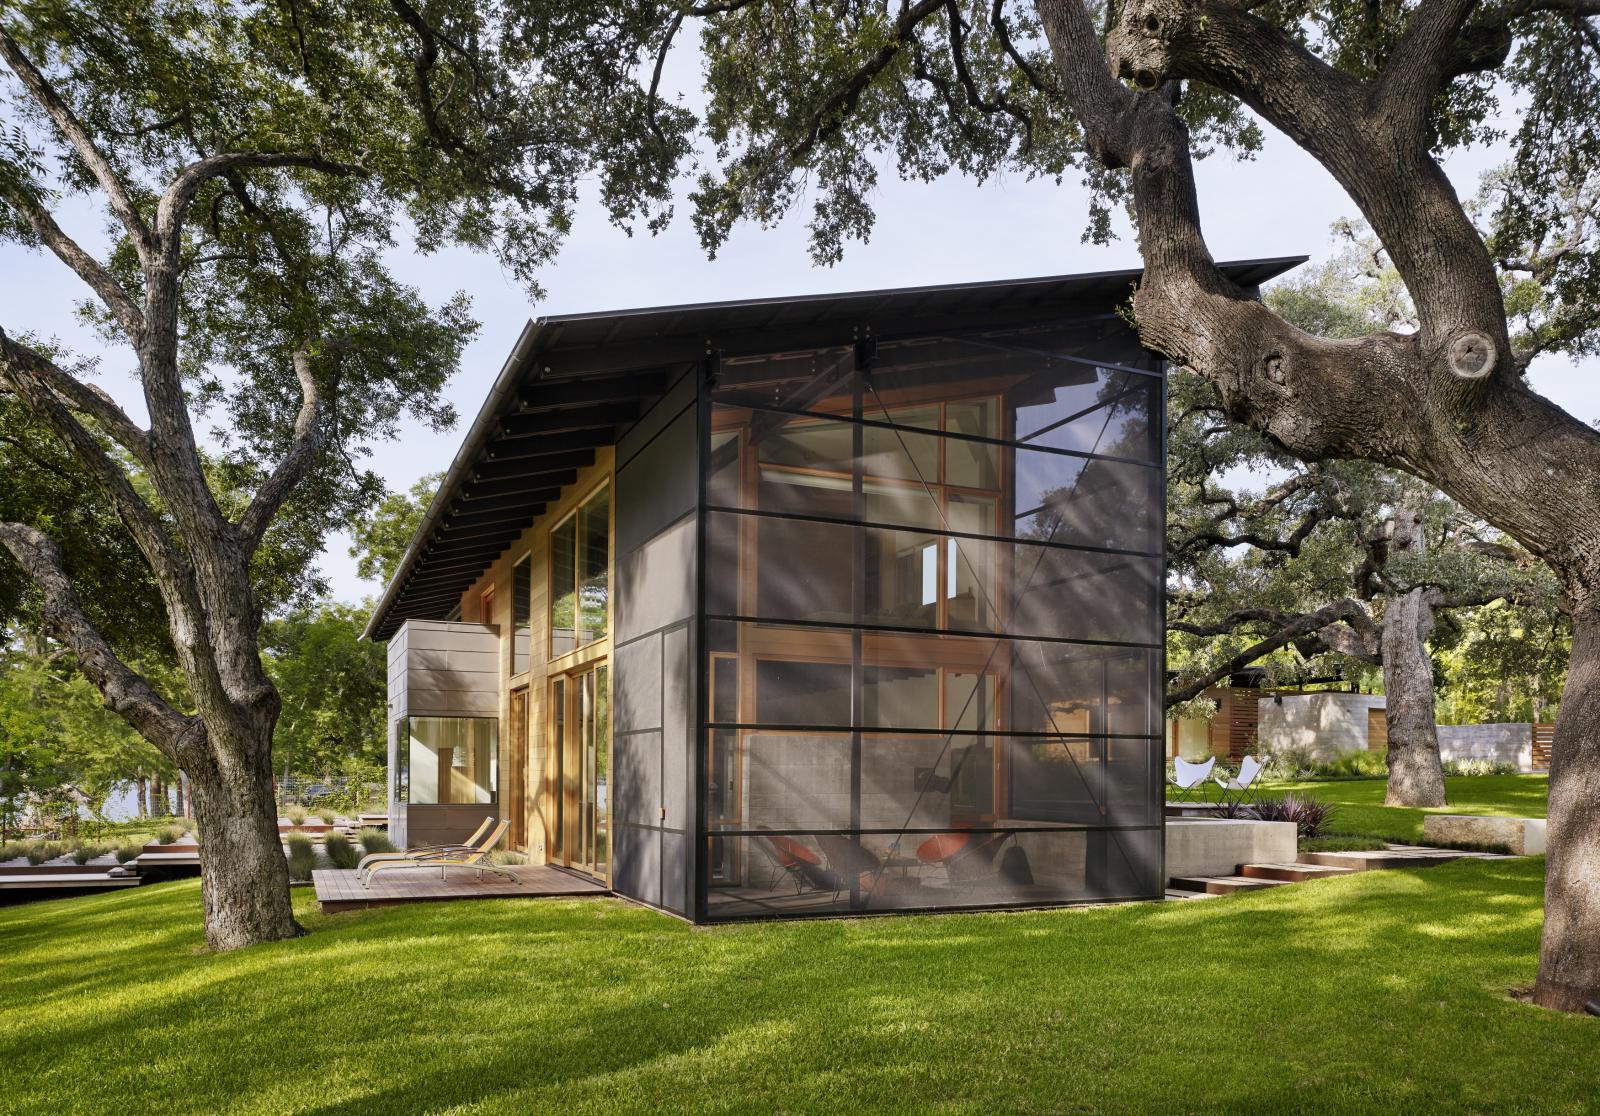 Situated at the confluence of Hog Pen Creek and Lake Austin, Hog Pen Creek Residence was envisioned by its owners as a place that evokes the playfulness of summer on the lake. Twin porches and a two-story living area, with a treetop level master bedroom l